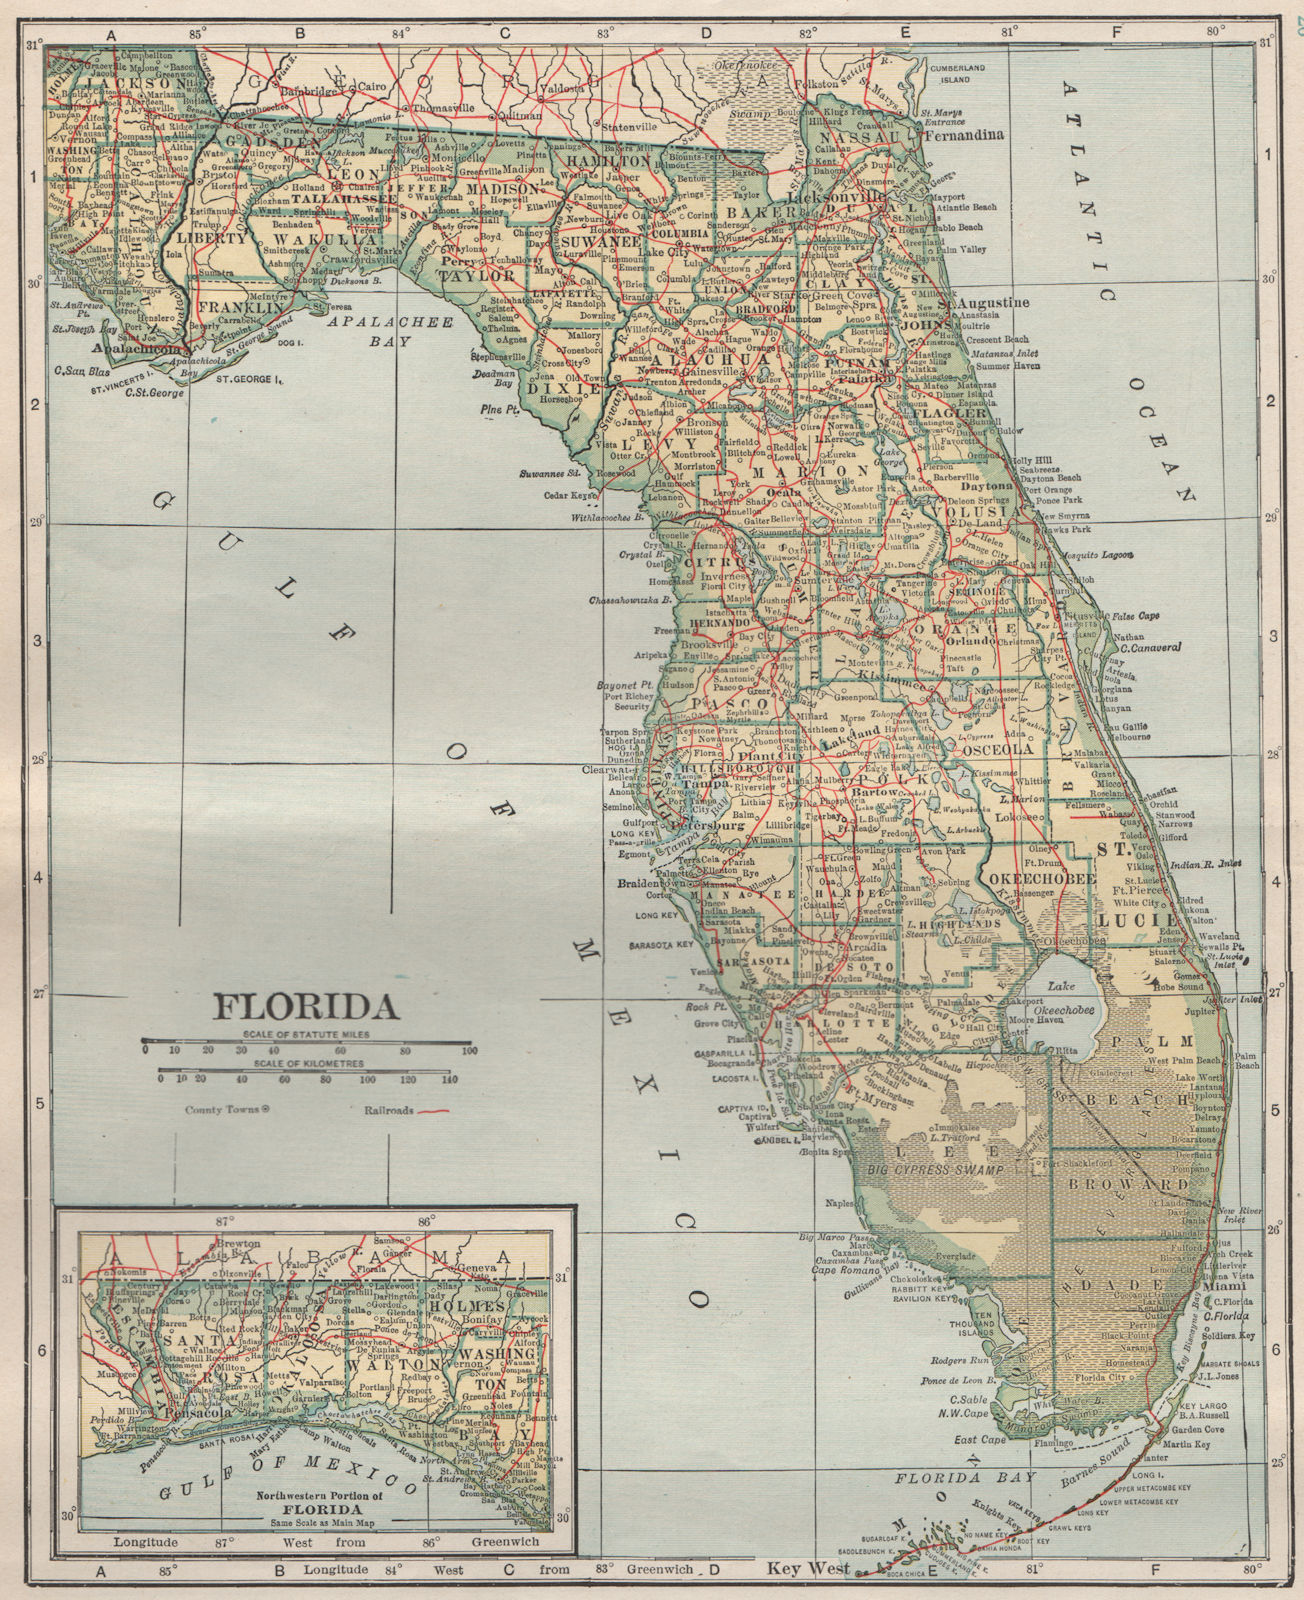 Florida state map showing railroads. POATES 1925 old vintage plan chart